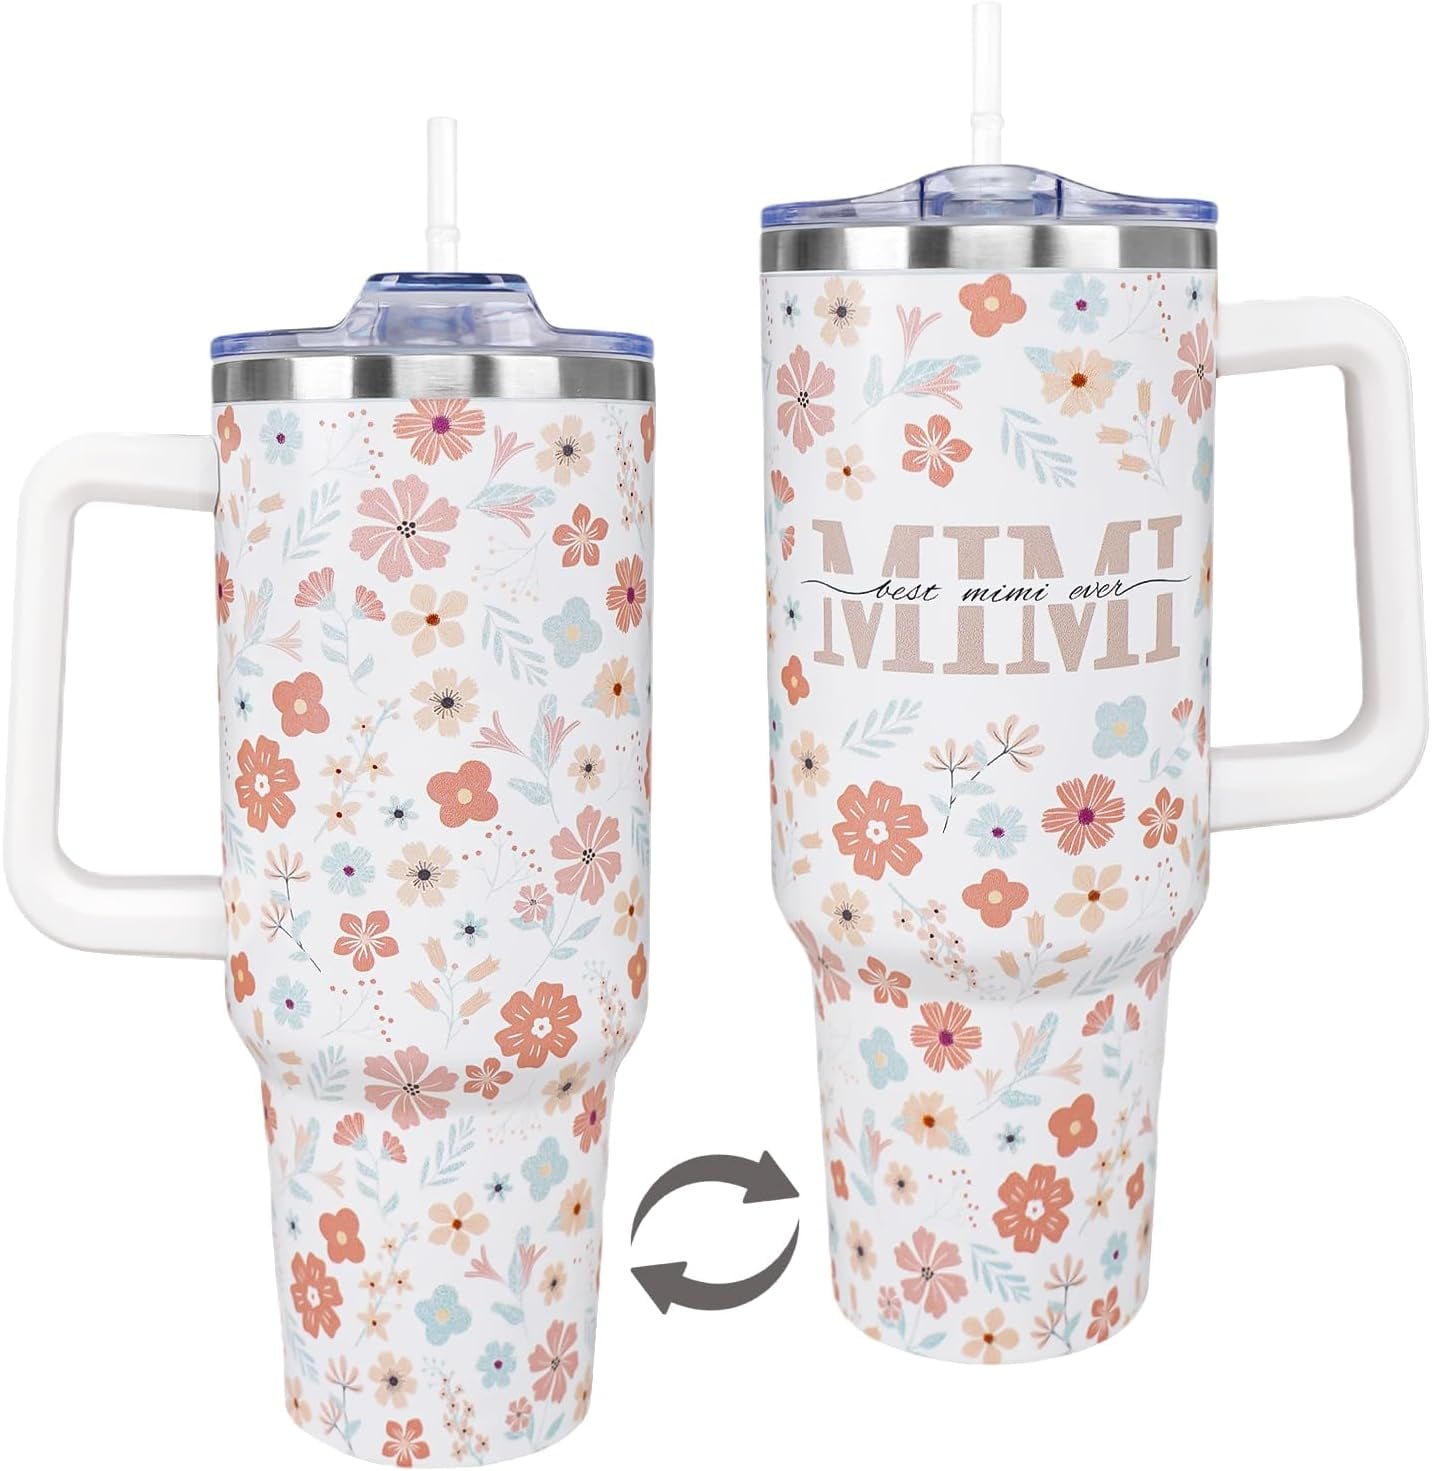 Great-grandma Travel Tumbler With Handle this is What Amazing